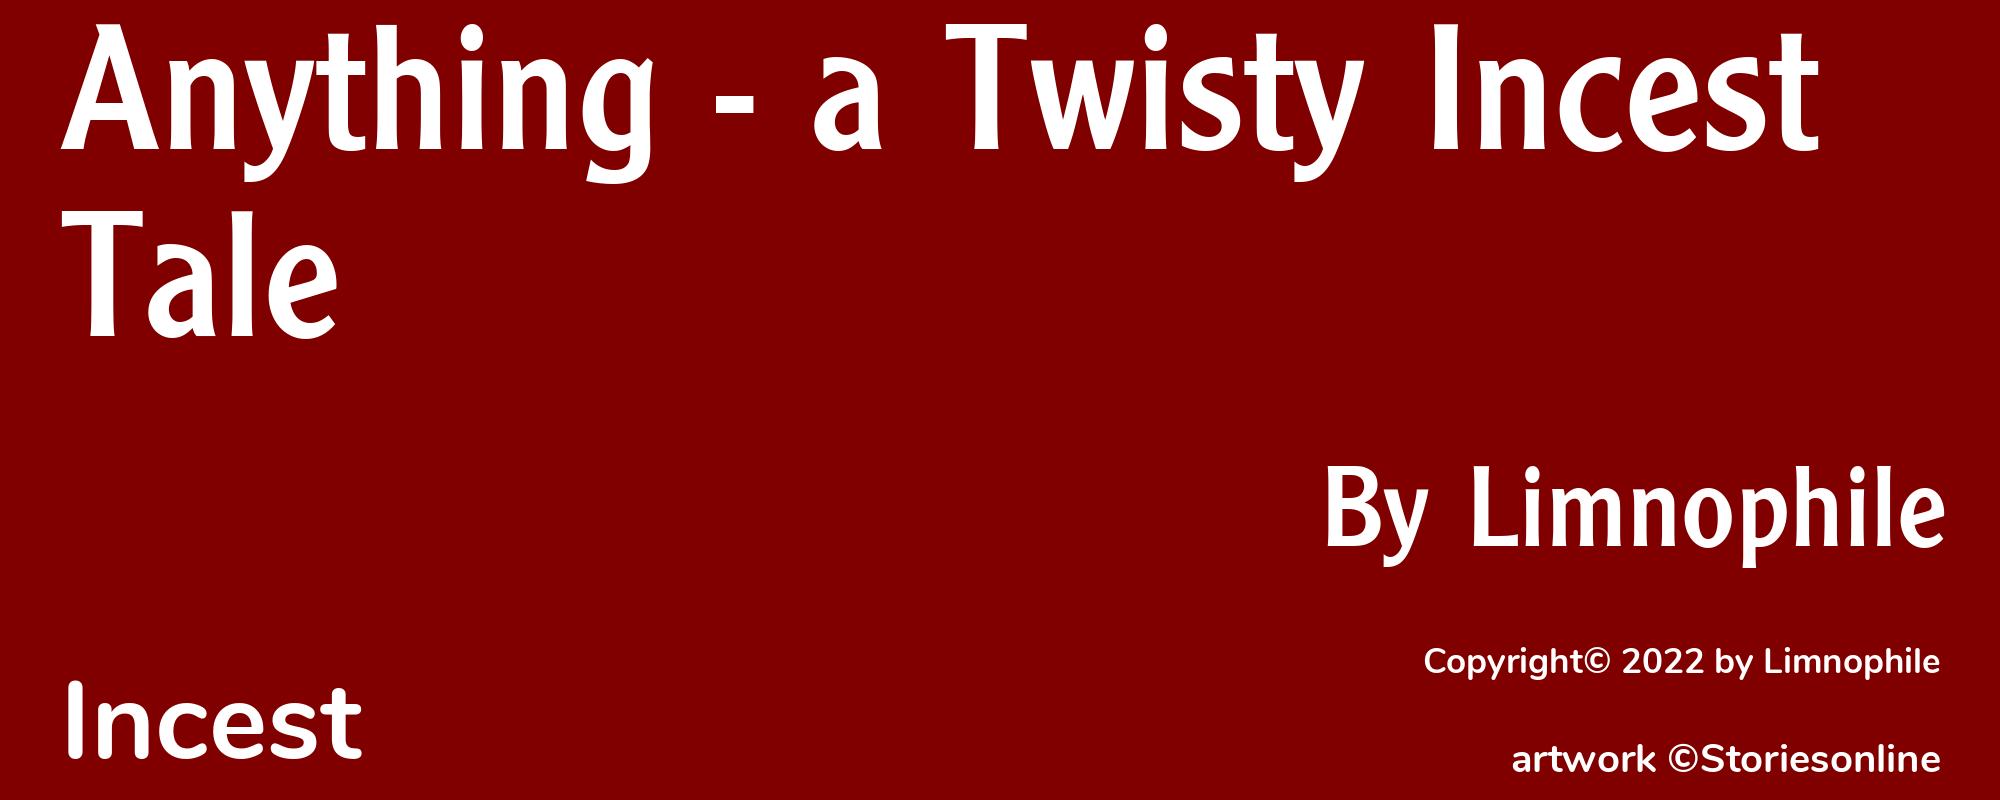 Anything - a Twisty Incest Tale - Cover